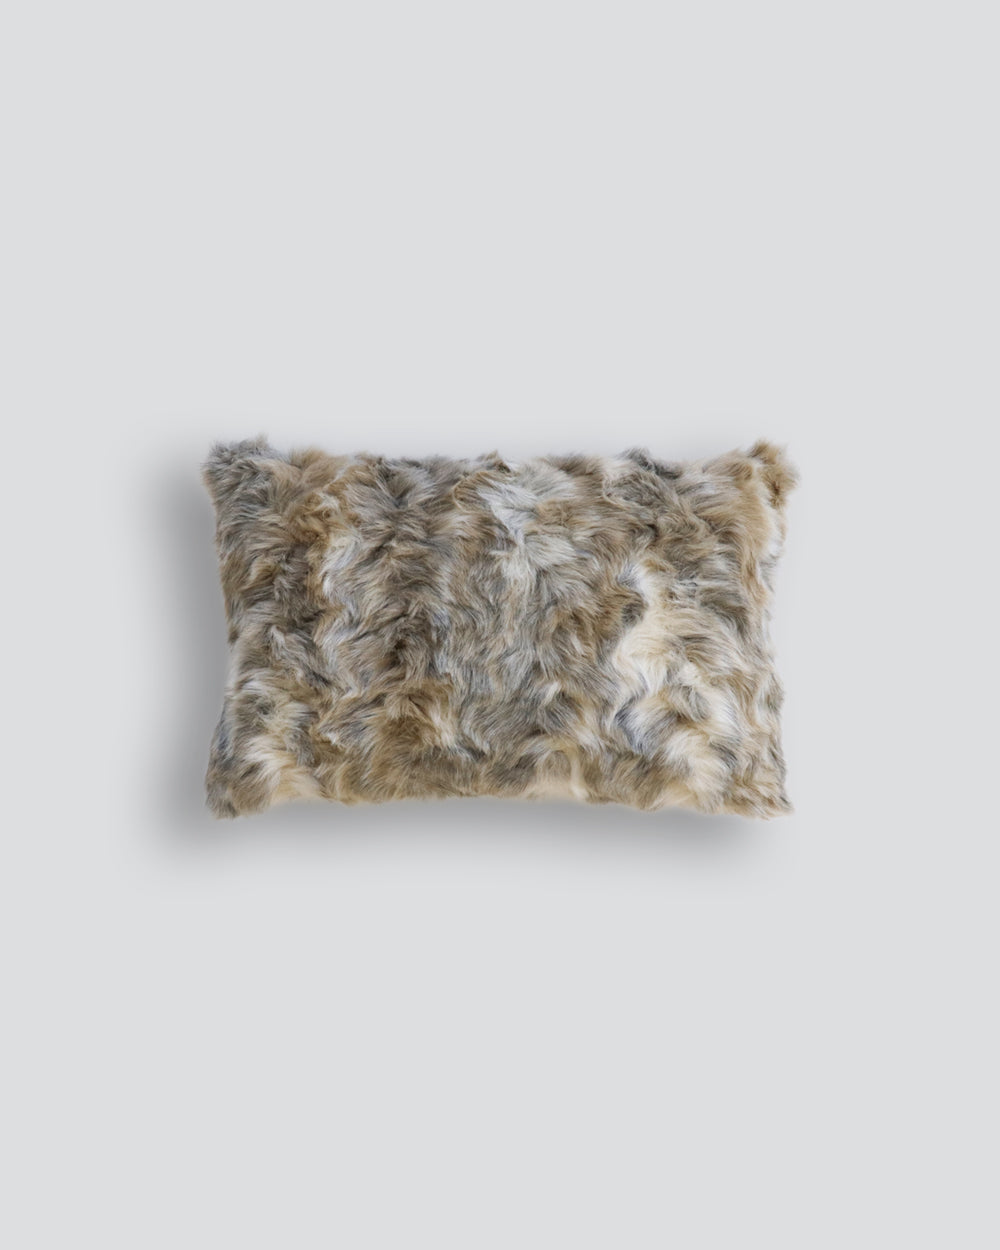 Heirloom Vintage Squirrel Grey Cushions in Faux Fur are available from Make Your House A Home Premium Stockist. Furniture Store Bendigo, Victoria. Australia Wide Delivery. Furtex Baya.